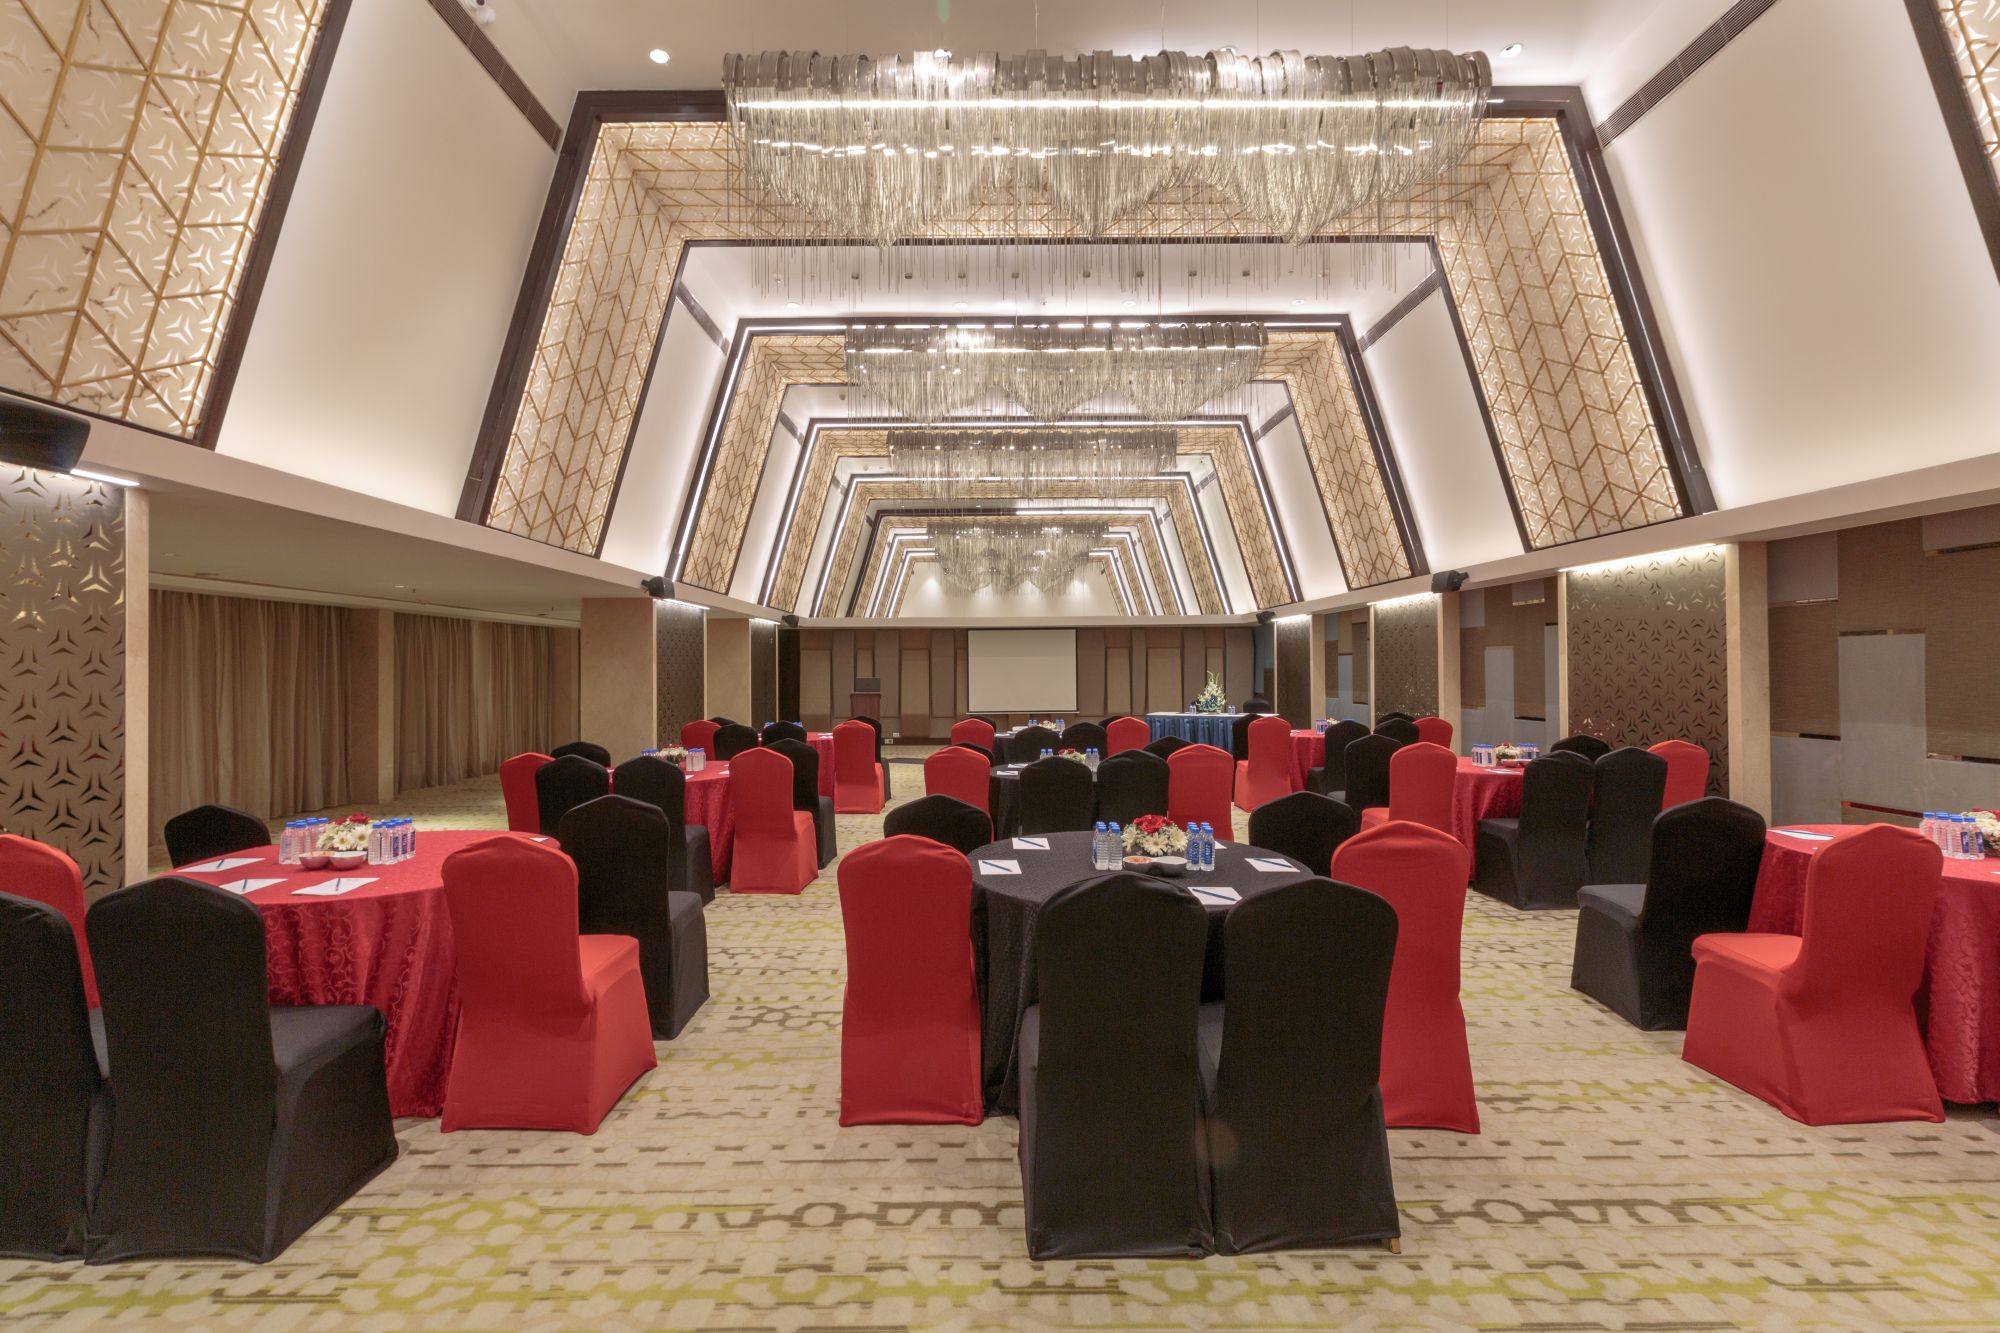 WOW HOTEL, at Indore, Madhya Pardesh, by Designers Group 3